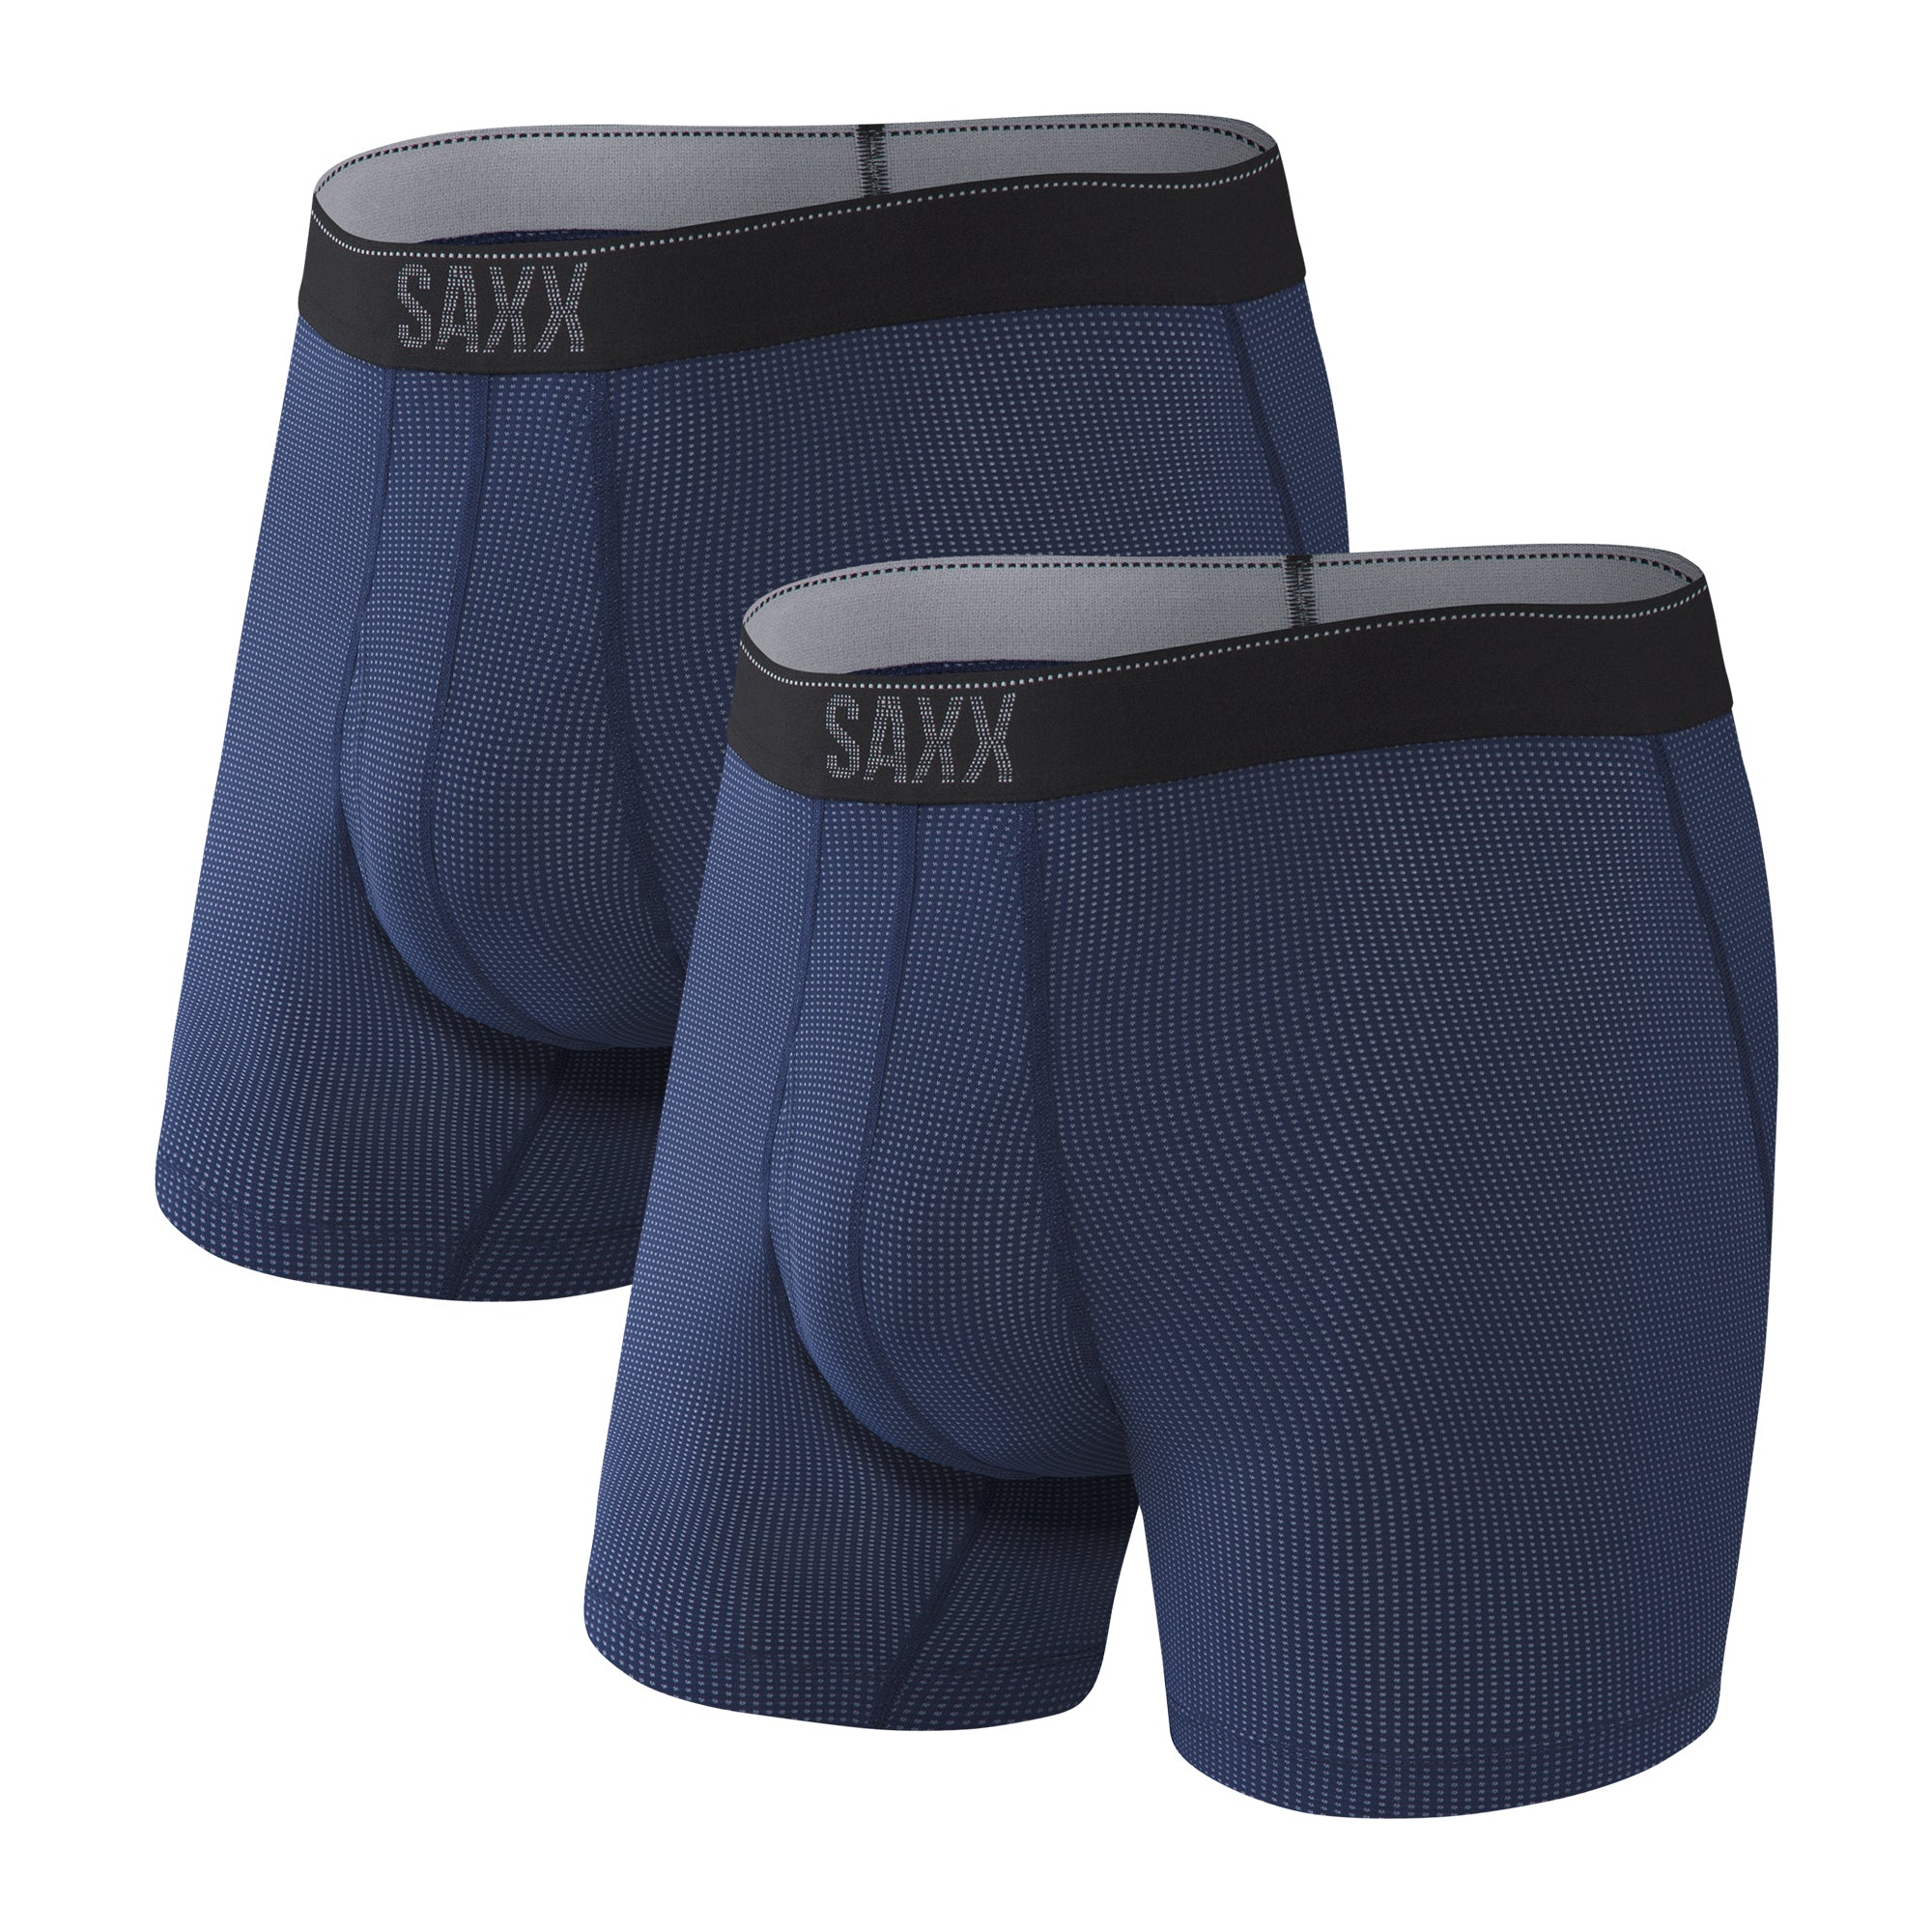 Saxx Sport Mesh Boxer Brief Fly - Men's • Wanderlust Outfitters™